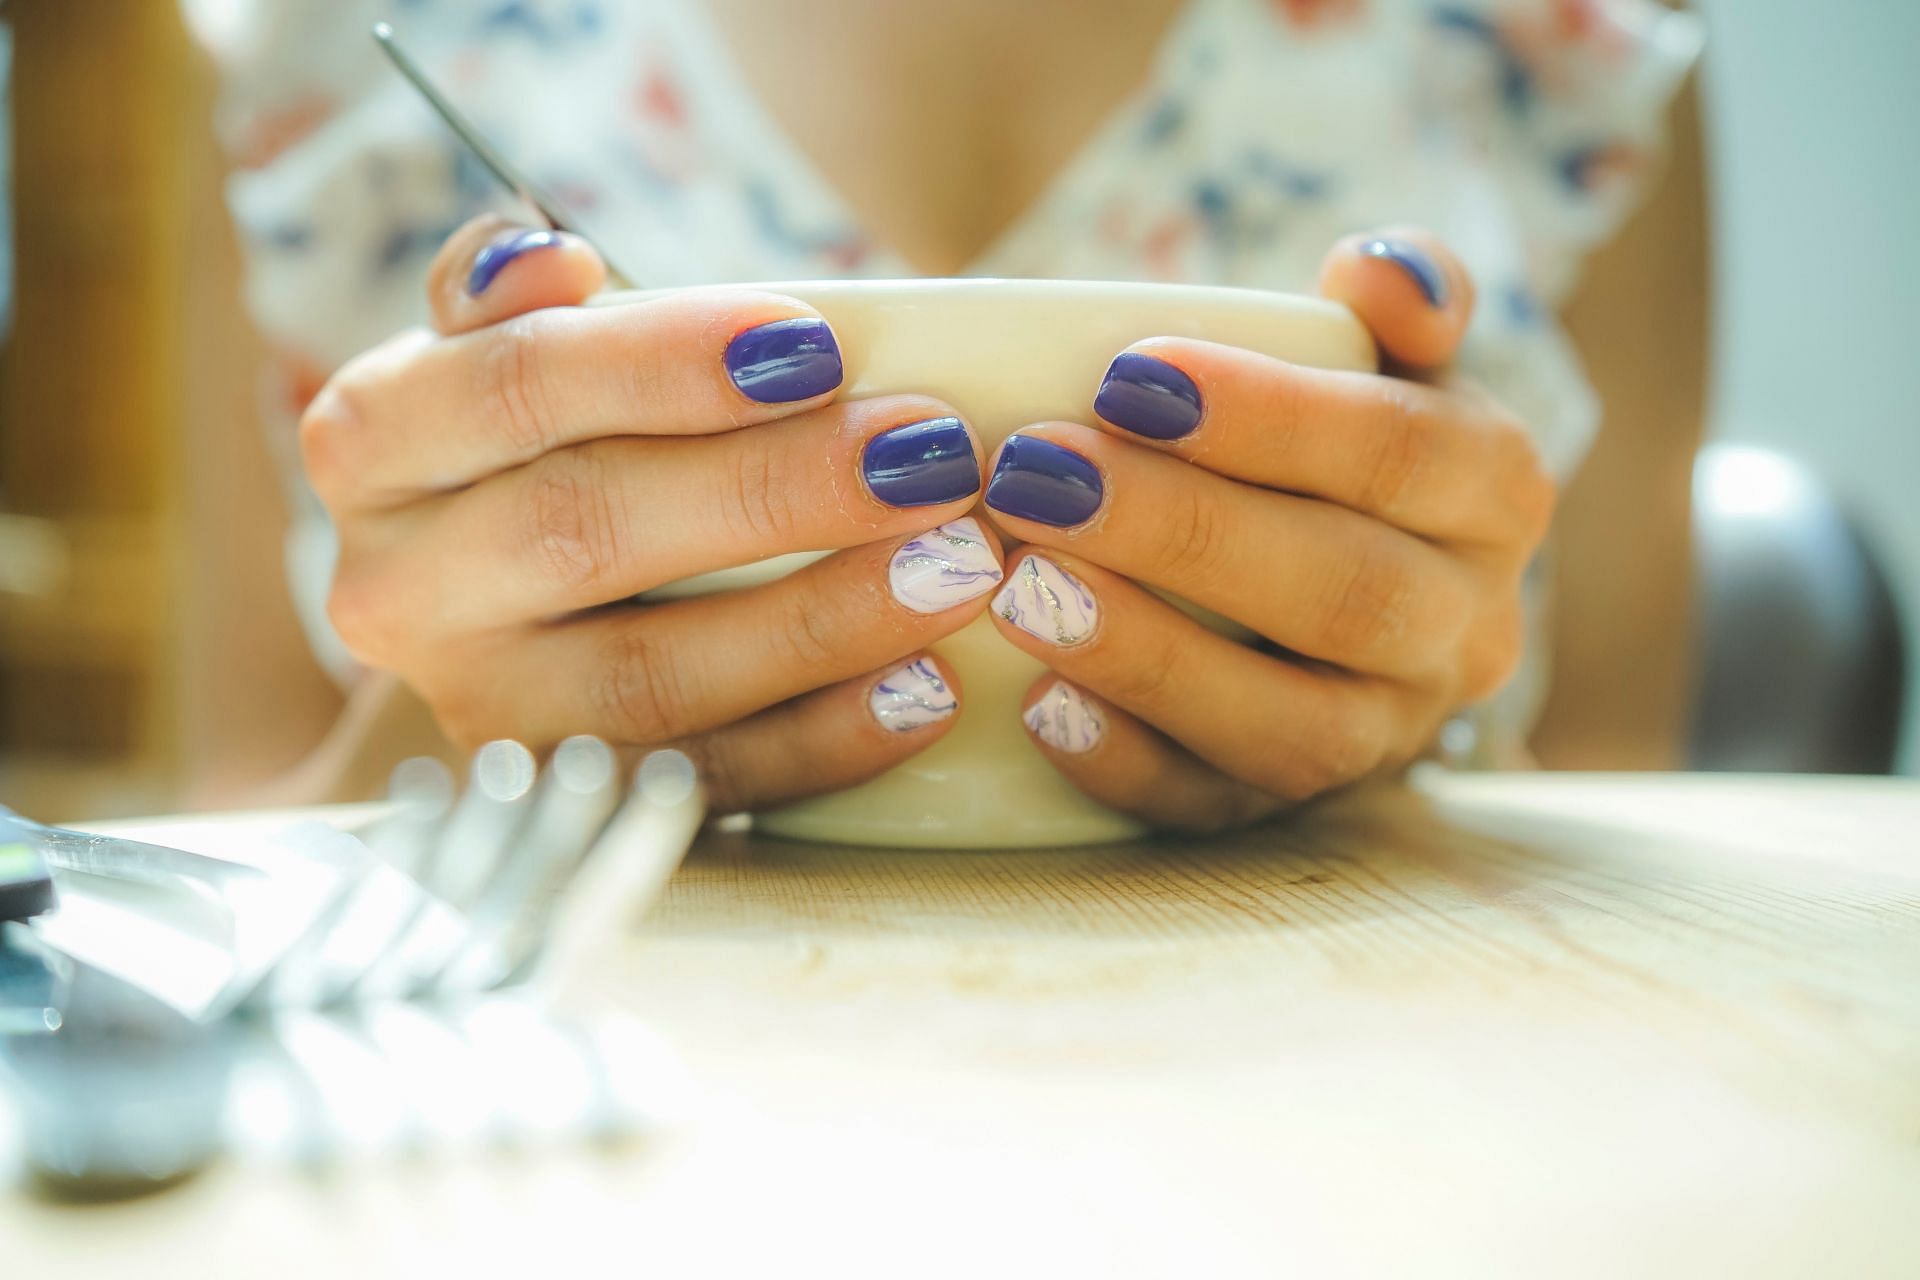 Benefits of strong nails (image sourced via Pexels / Photo by nikita)